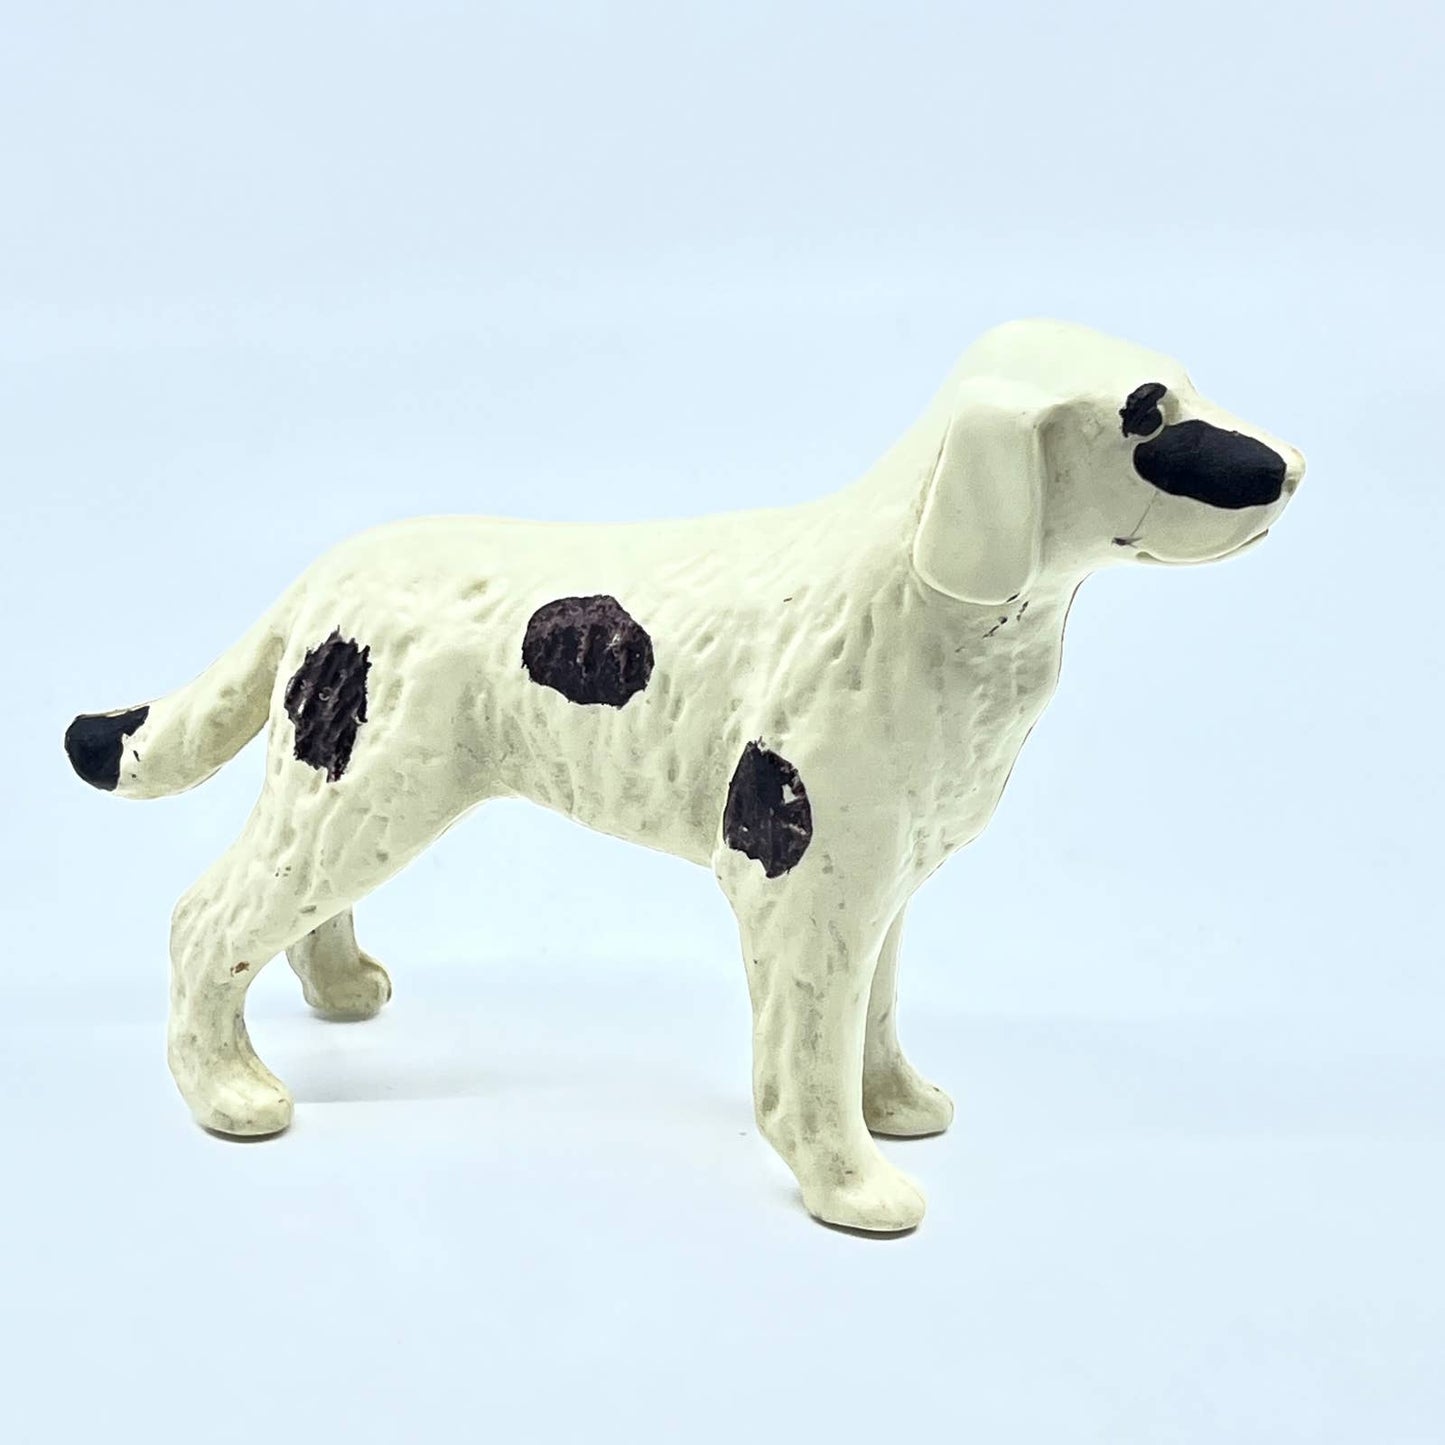 Vtg English Setter Black White Hand Painted Celluloid Dog Figure Toy 5" SD7